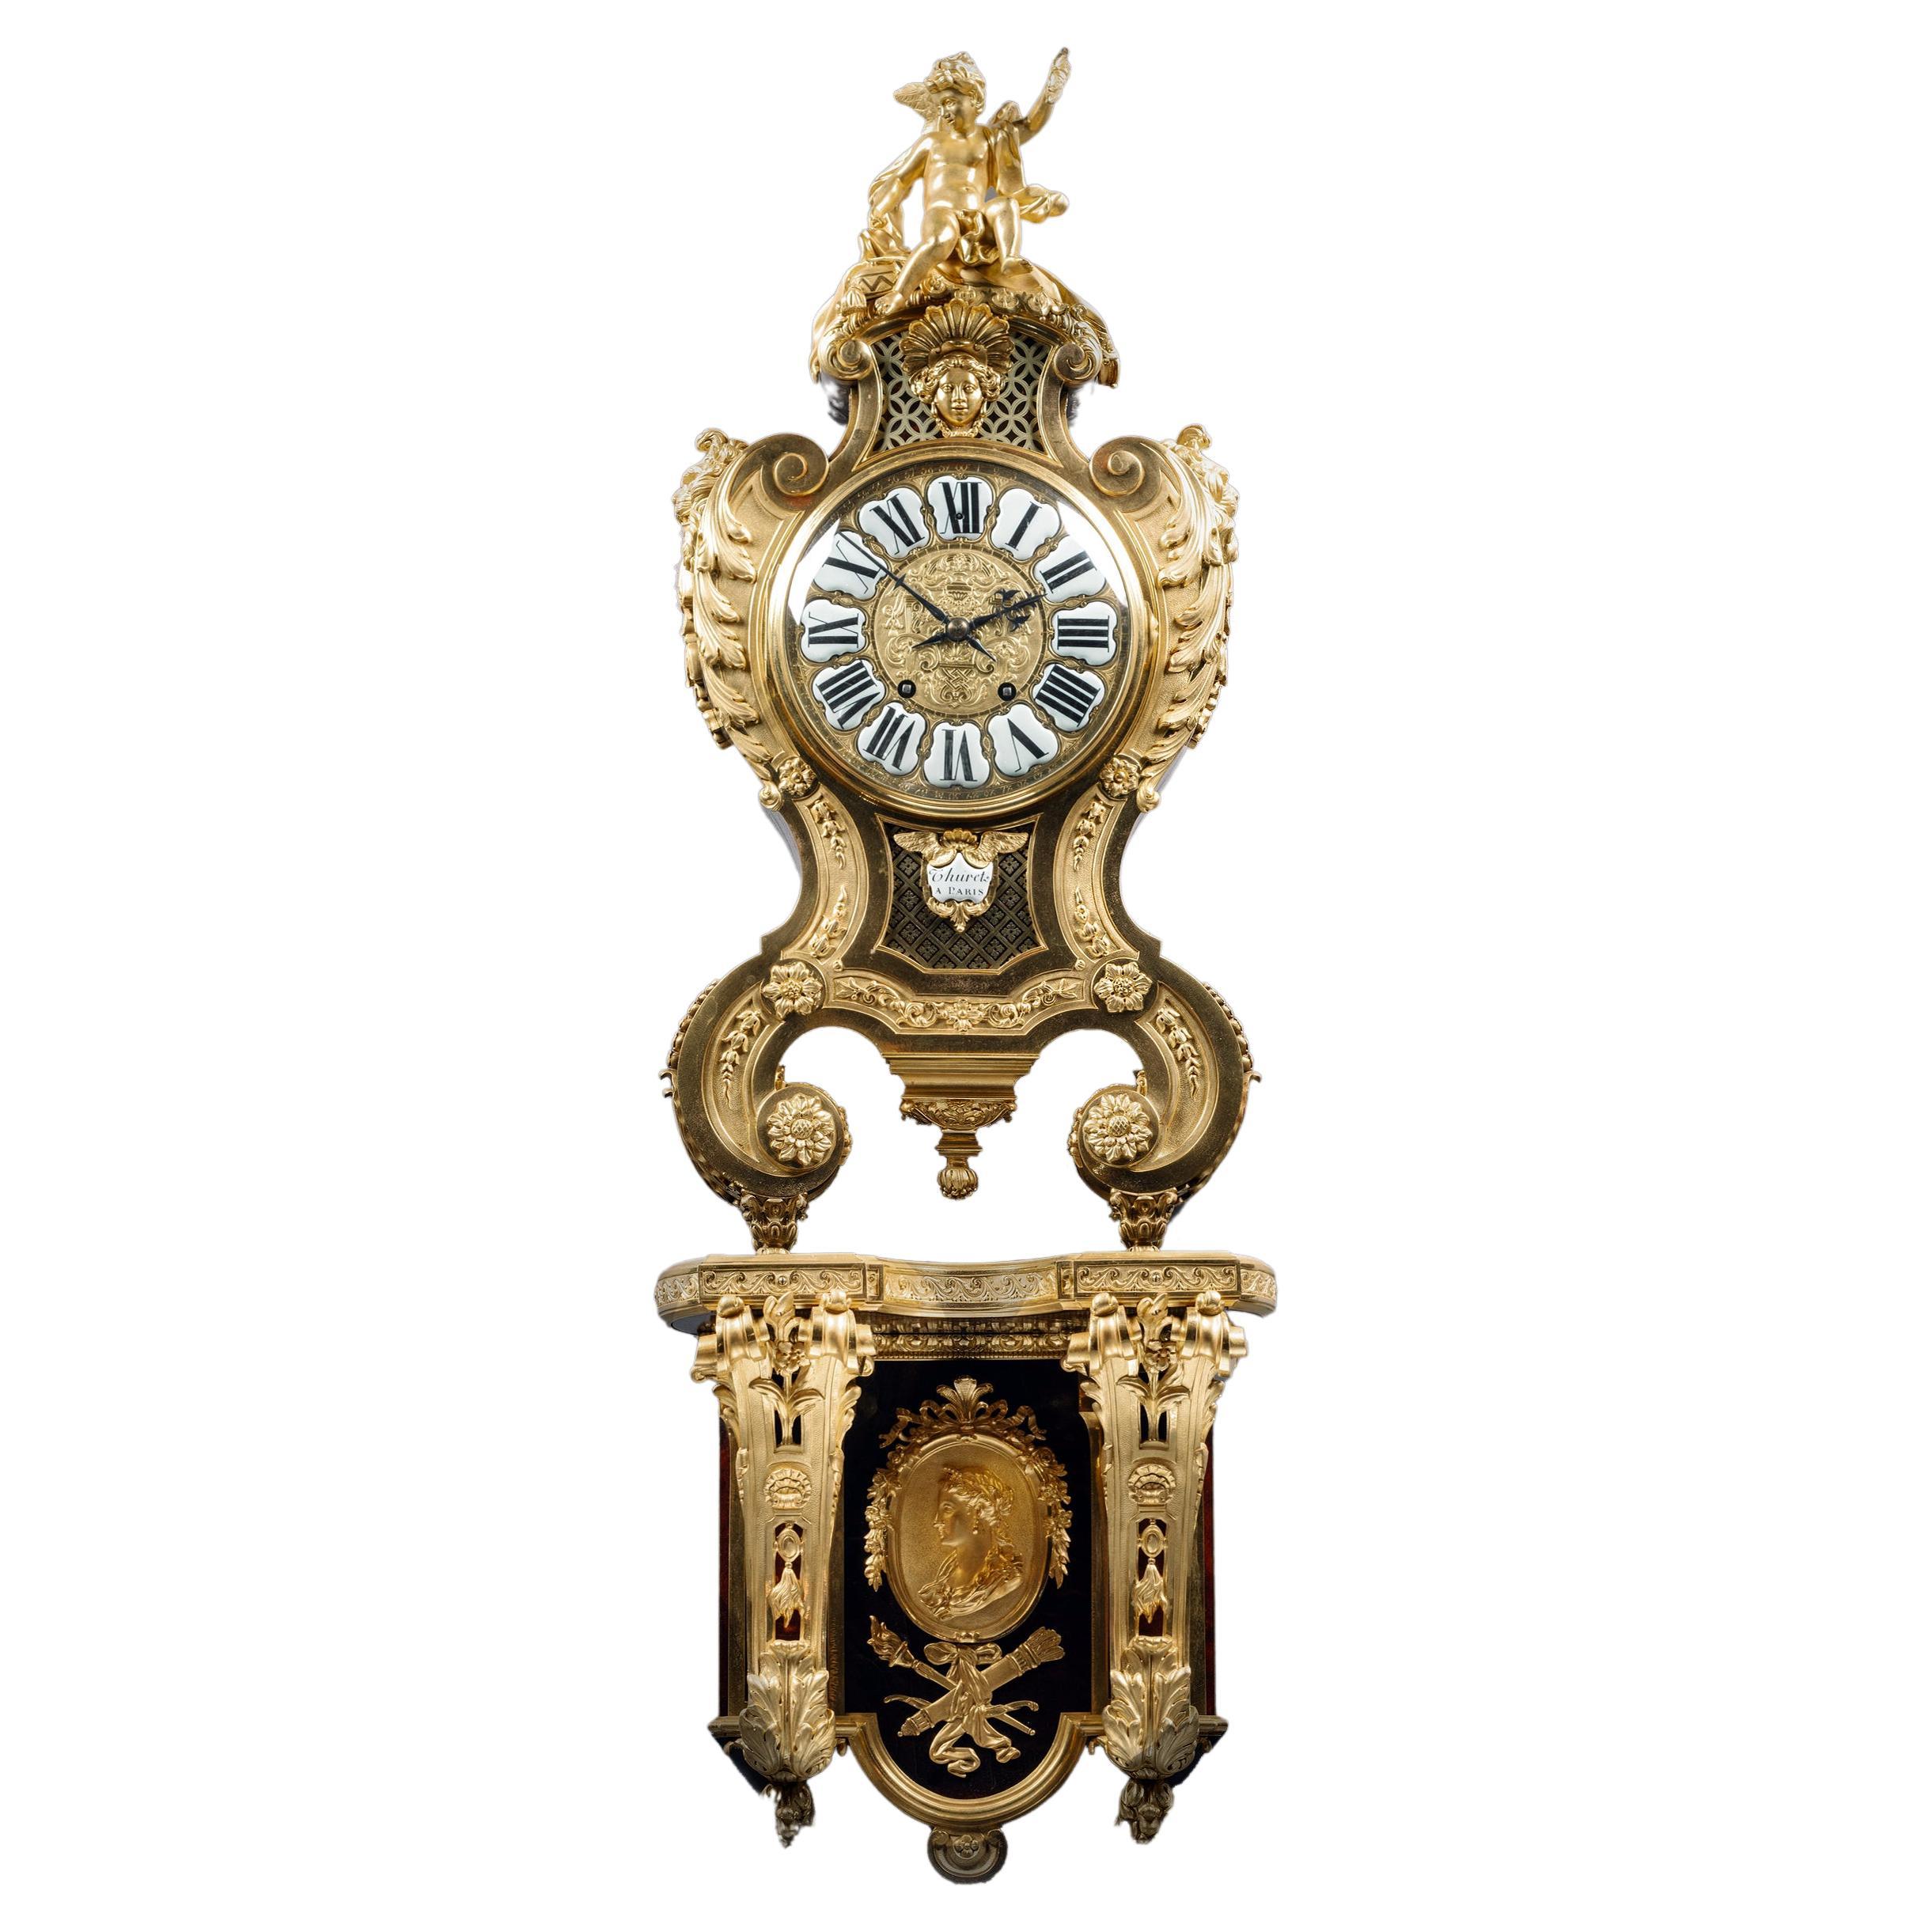 A Regence Style Grand Cartel de Applique In the Manner of André-Charles Boulle